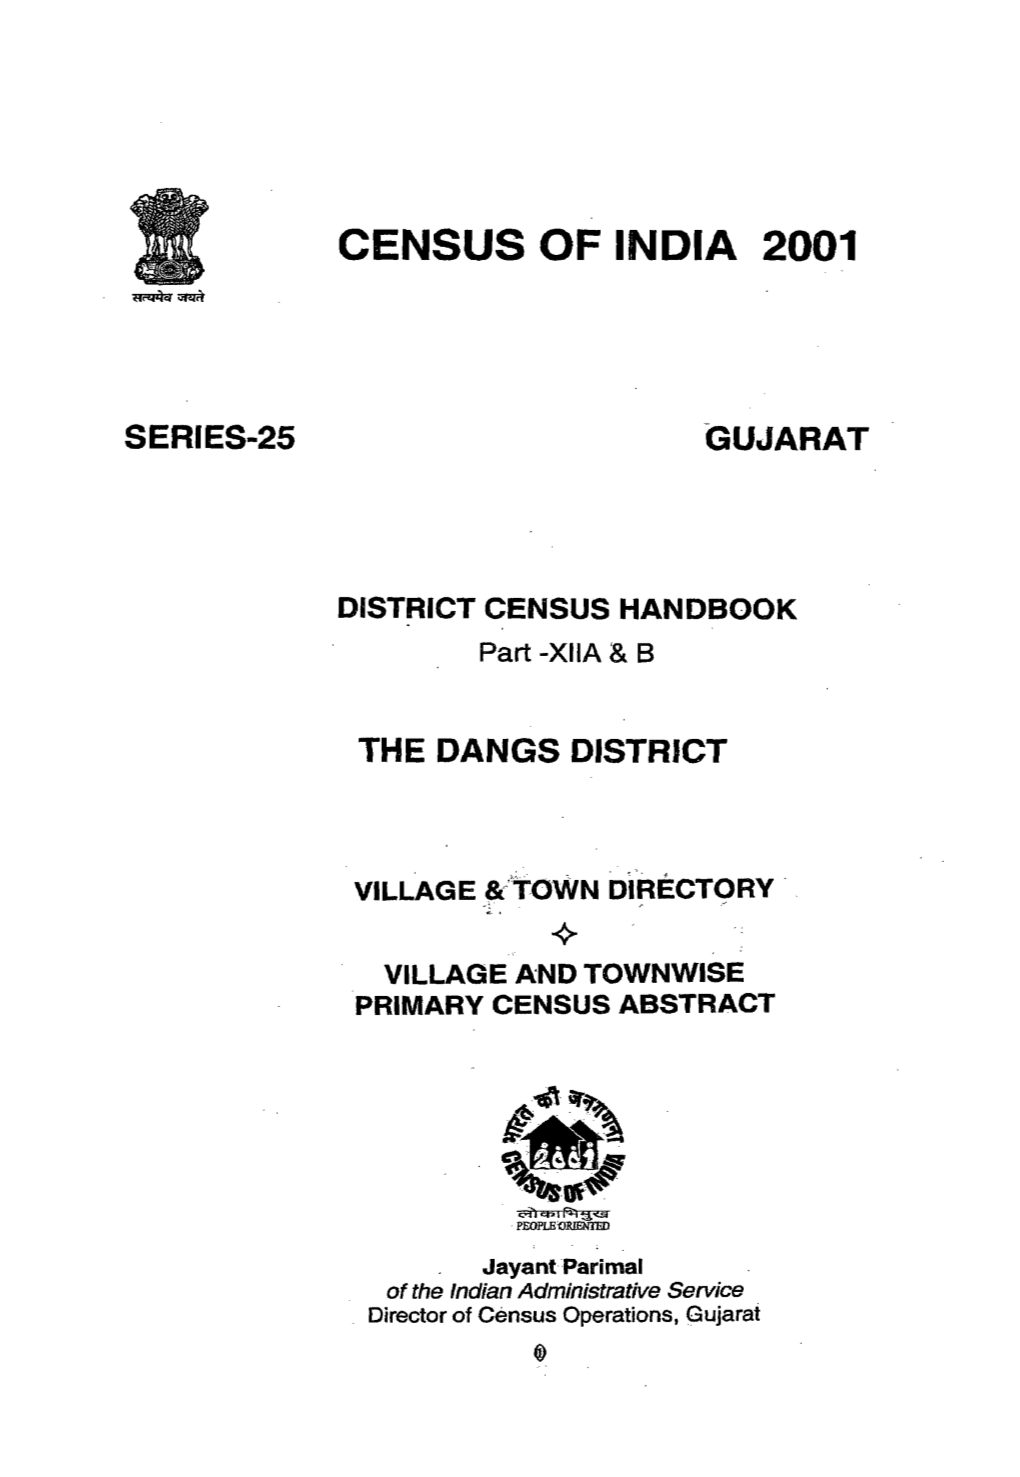 District Census Handbook, the Dangs, Part XII-A & B, Series-25